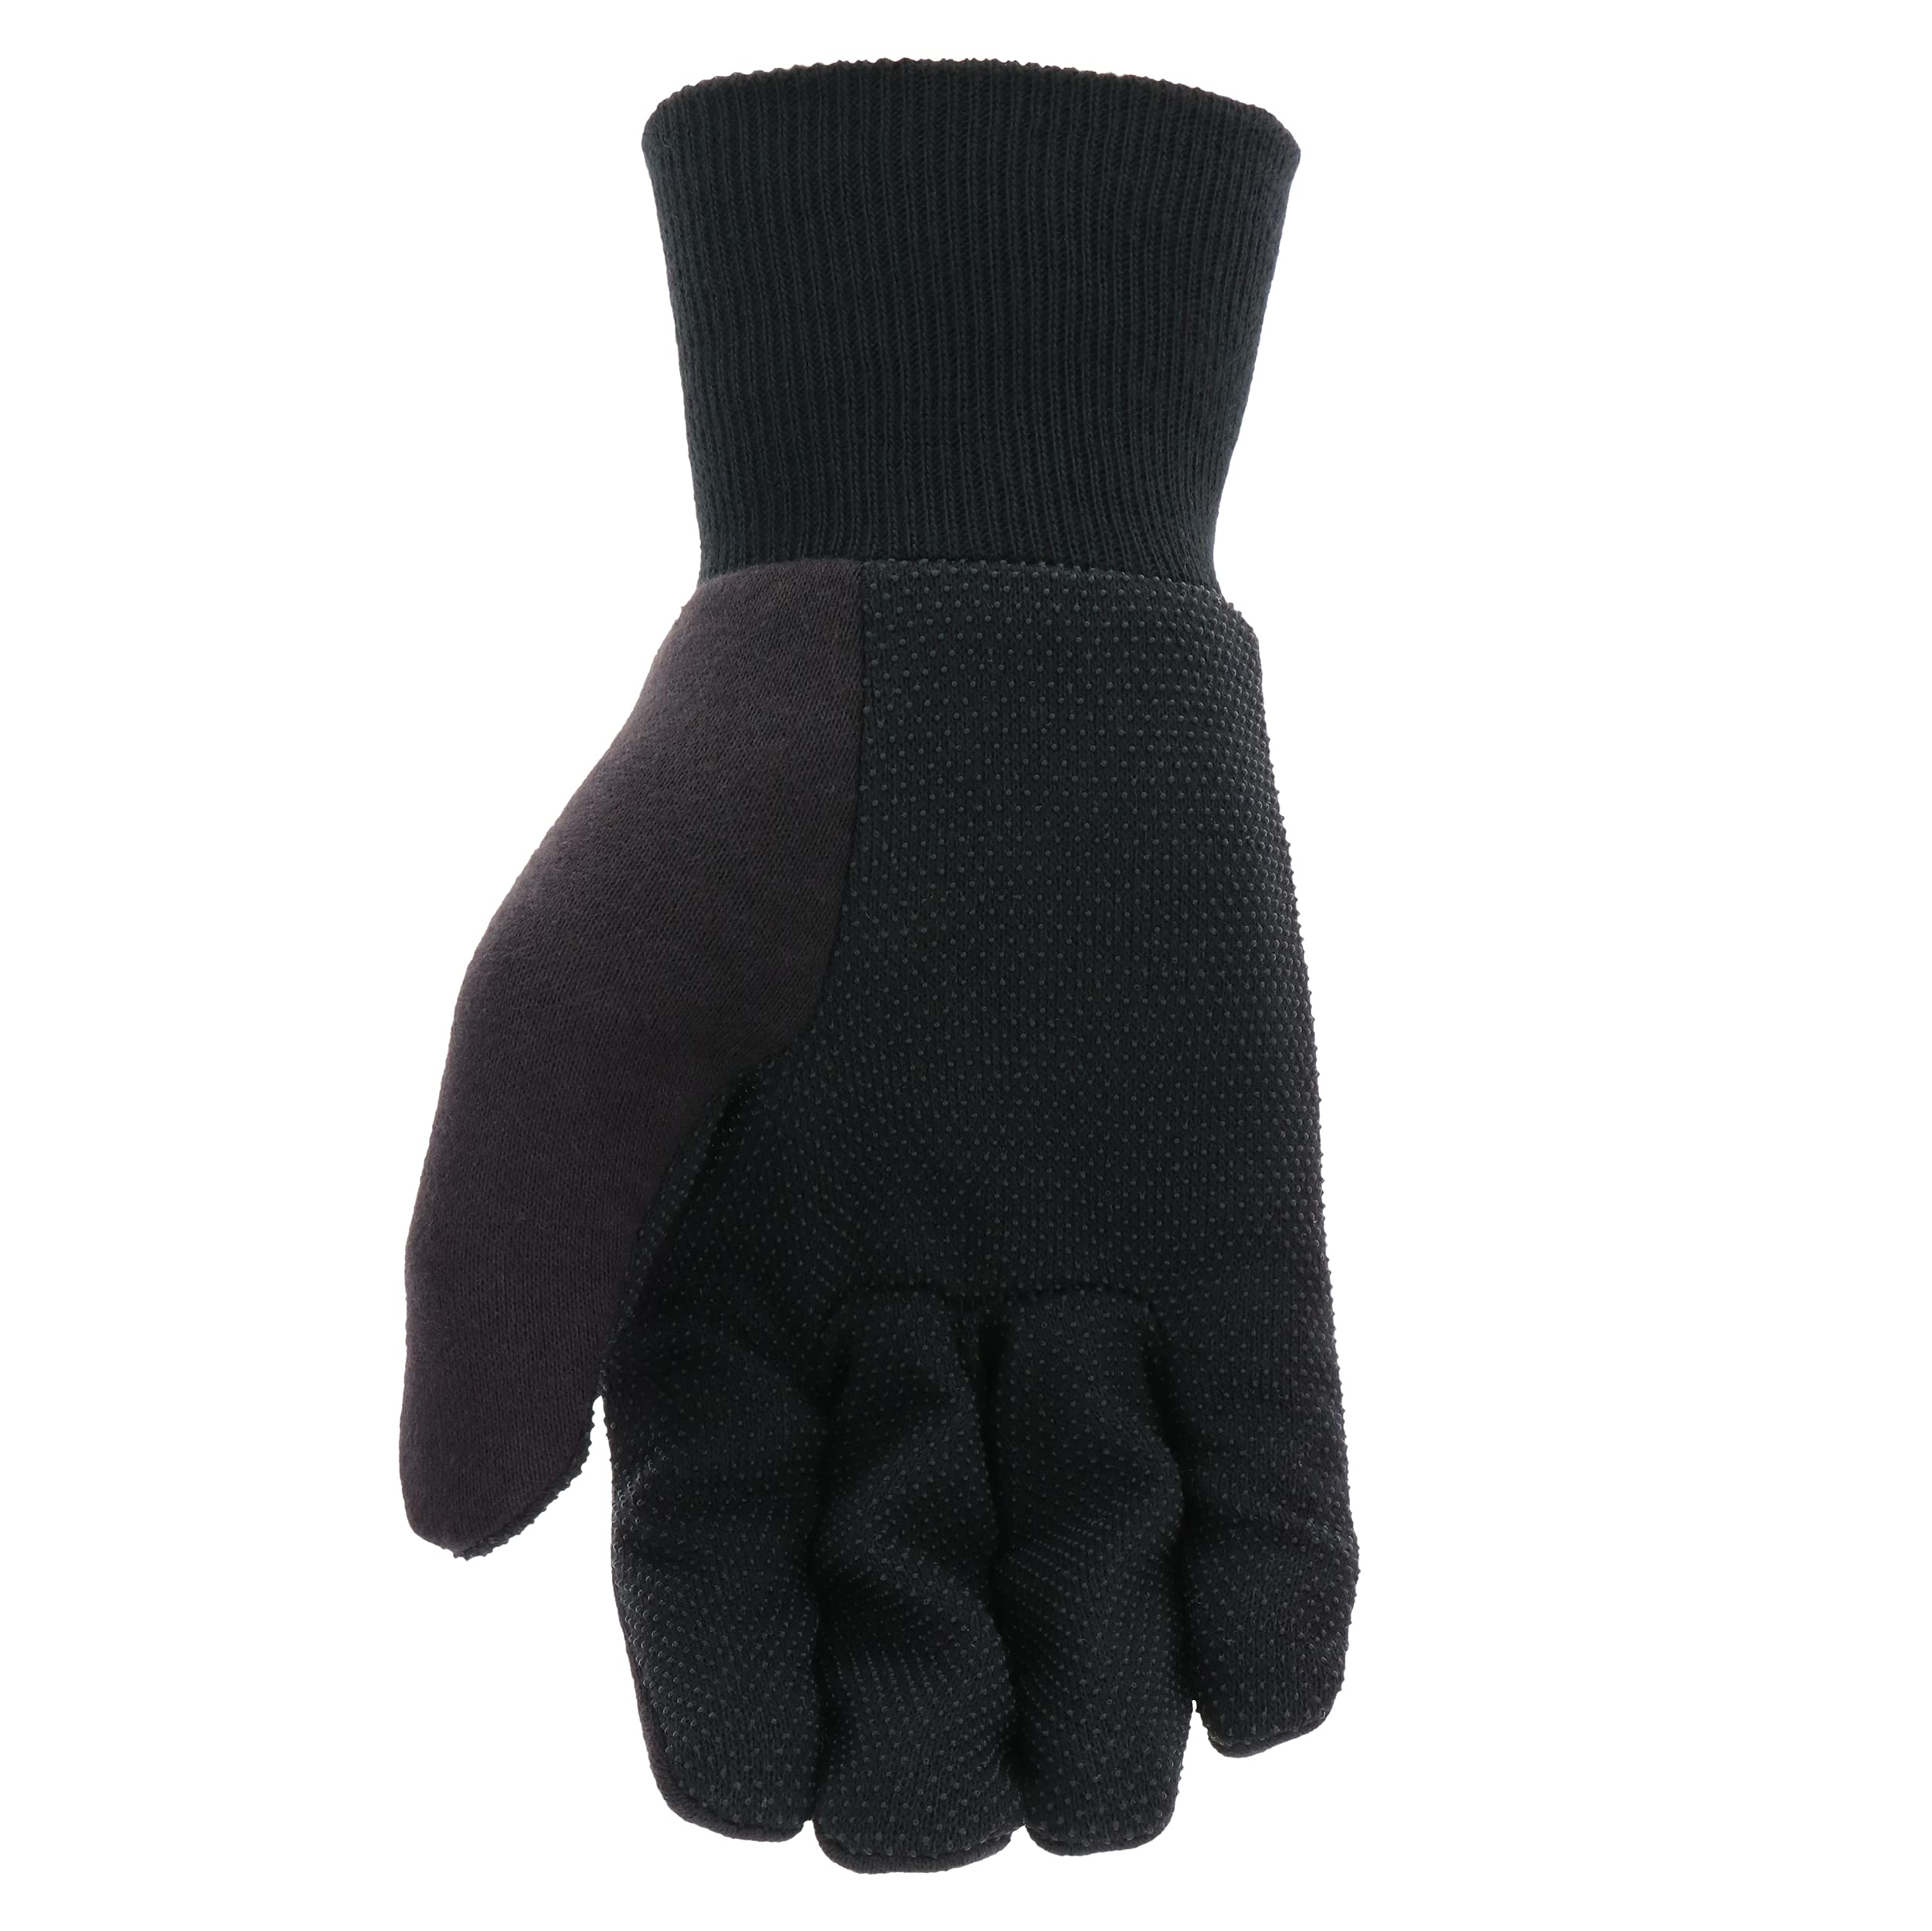 Cat® CAT015400L Cotton Jersey Work Gloves – Black, Large, Breathable, Gunn-Cut PVC Micro Dot Palm Gloves with Knit Wrists